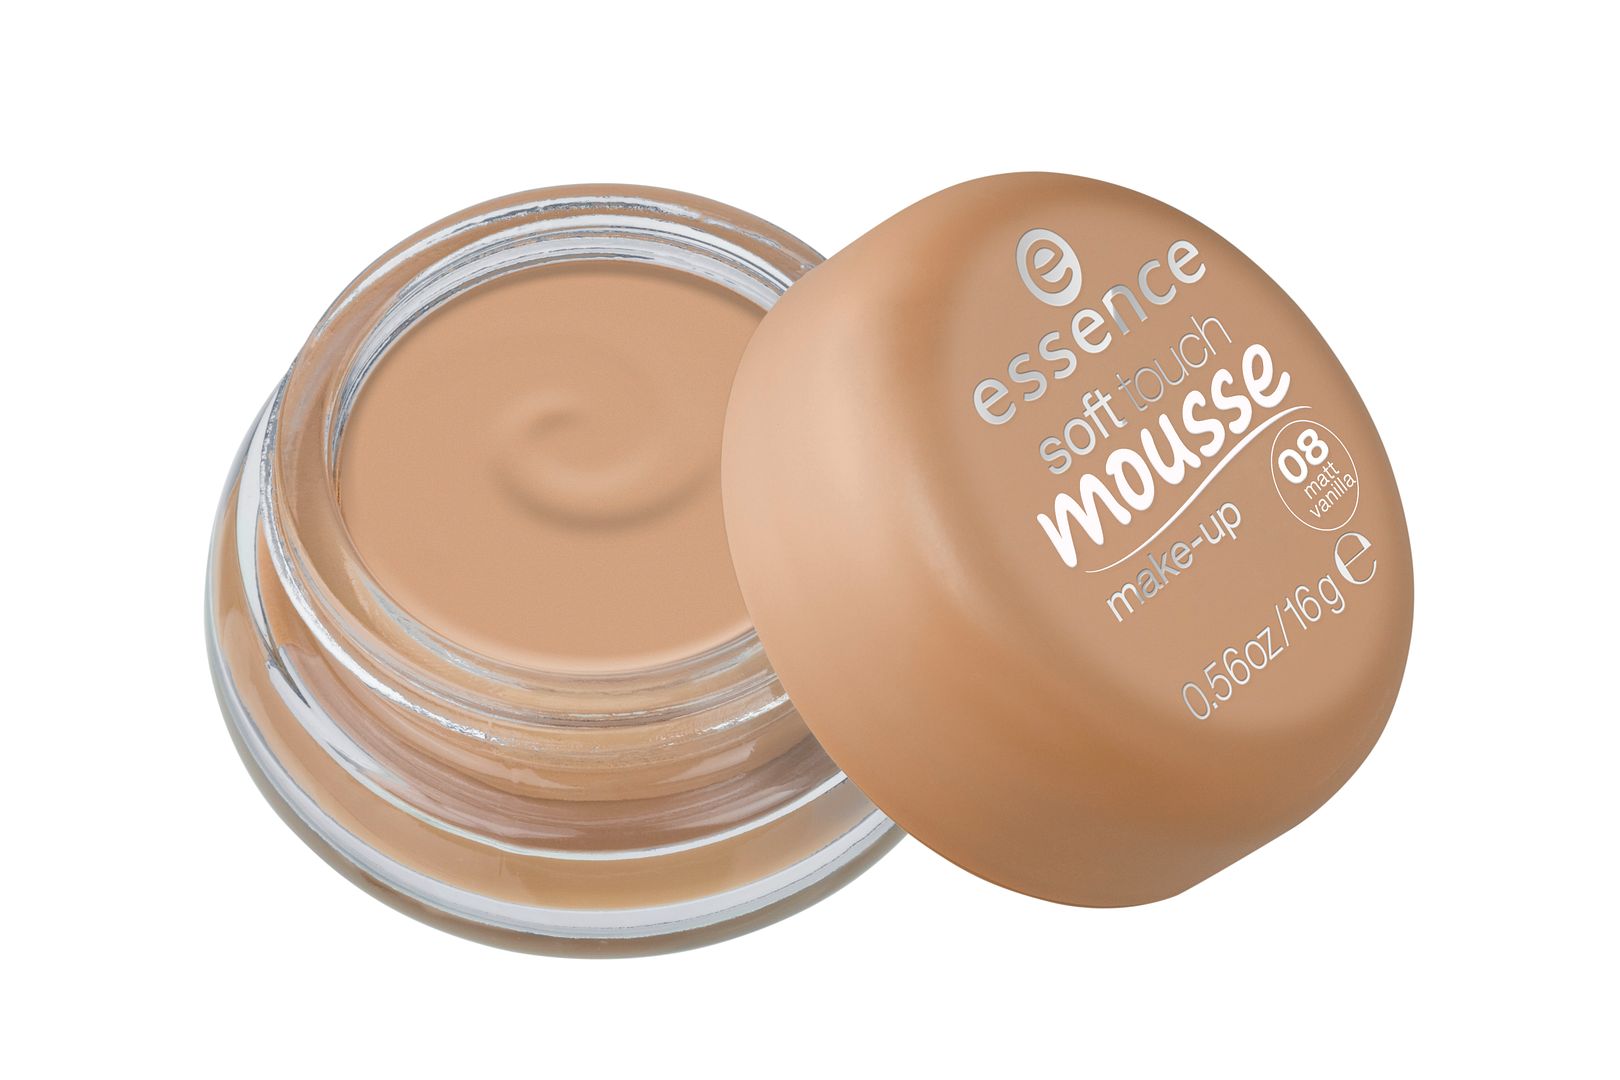 essence soft touch mousse make-up